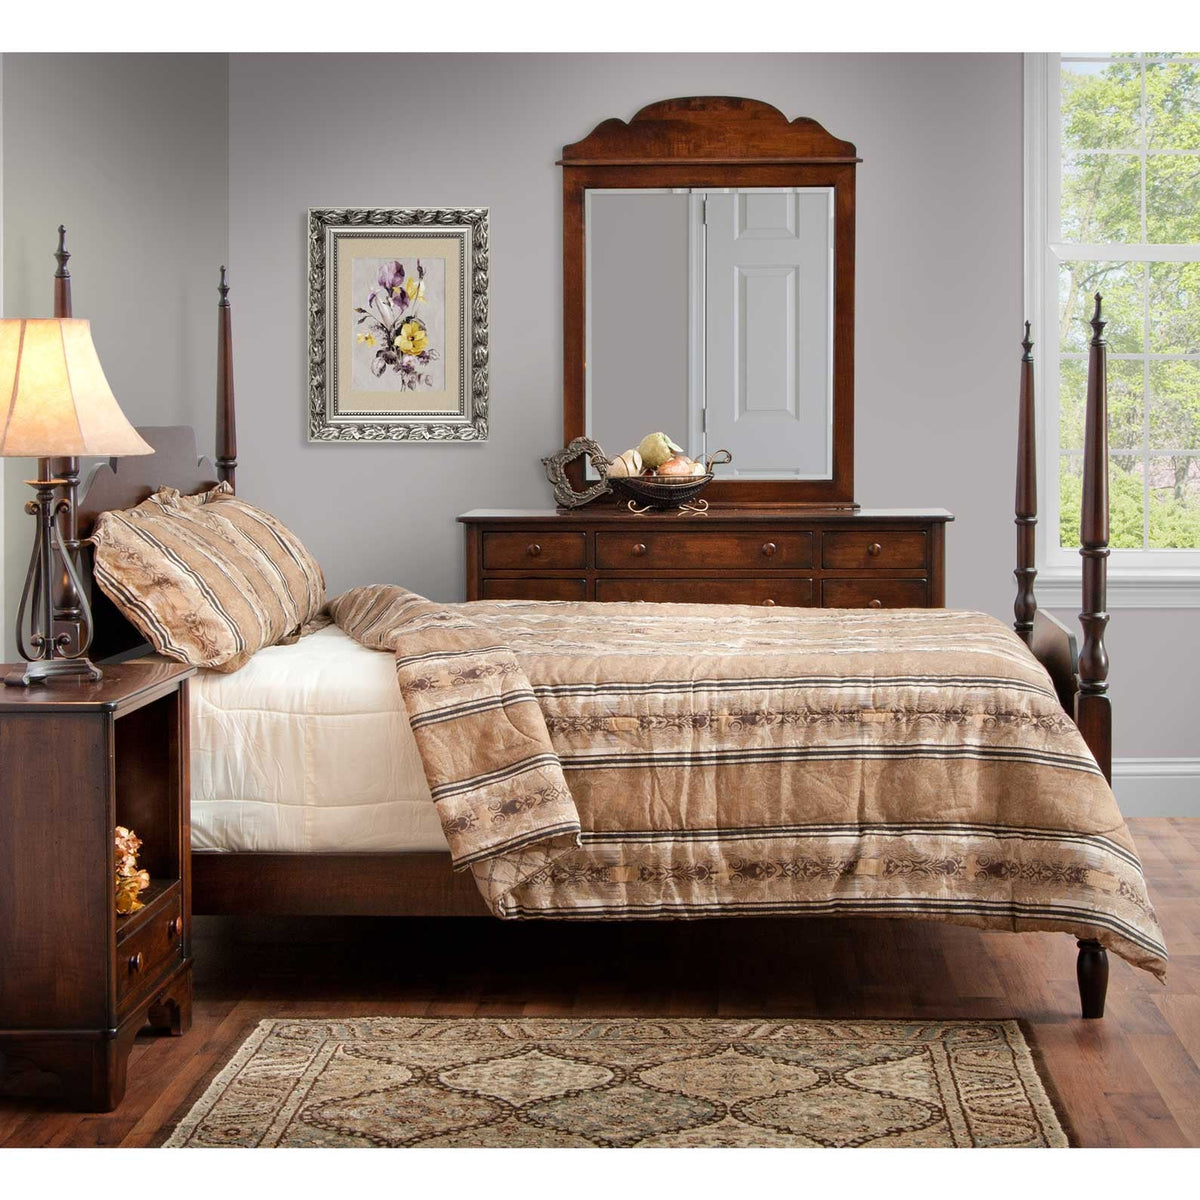 New Amsterdam Arch Top Poster Bed - snyders.furniture